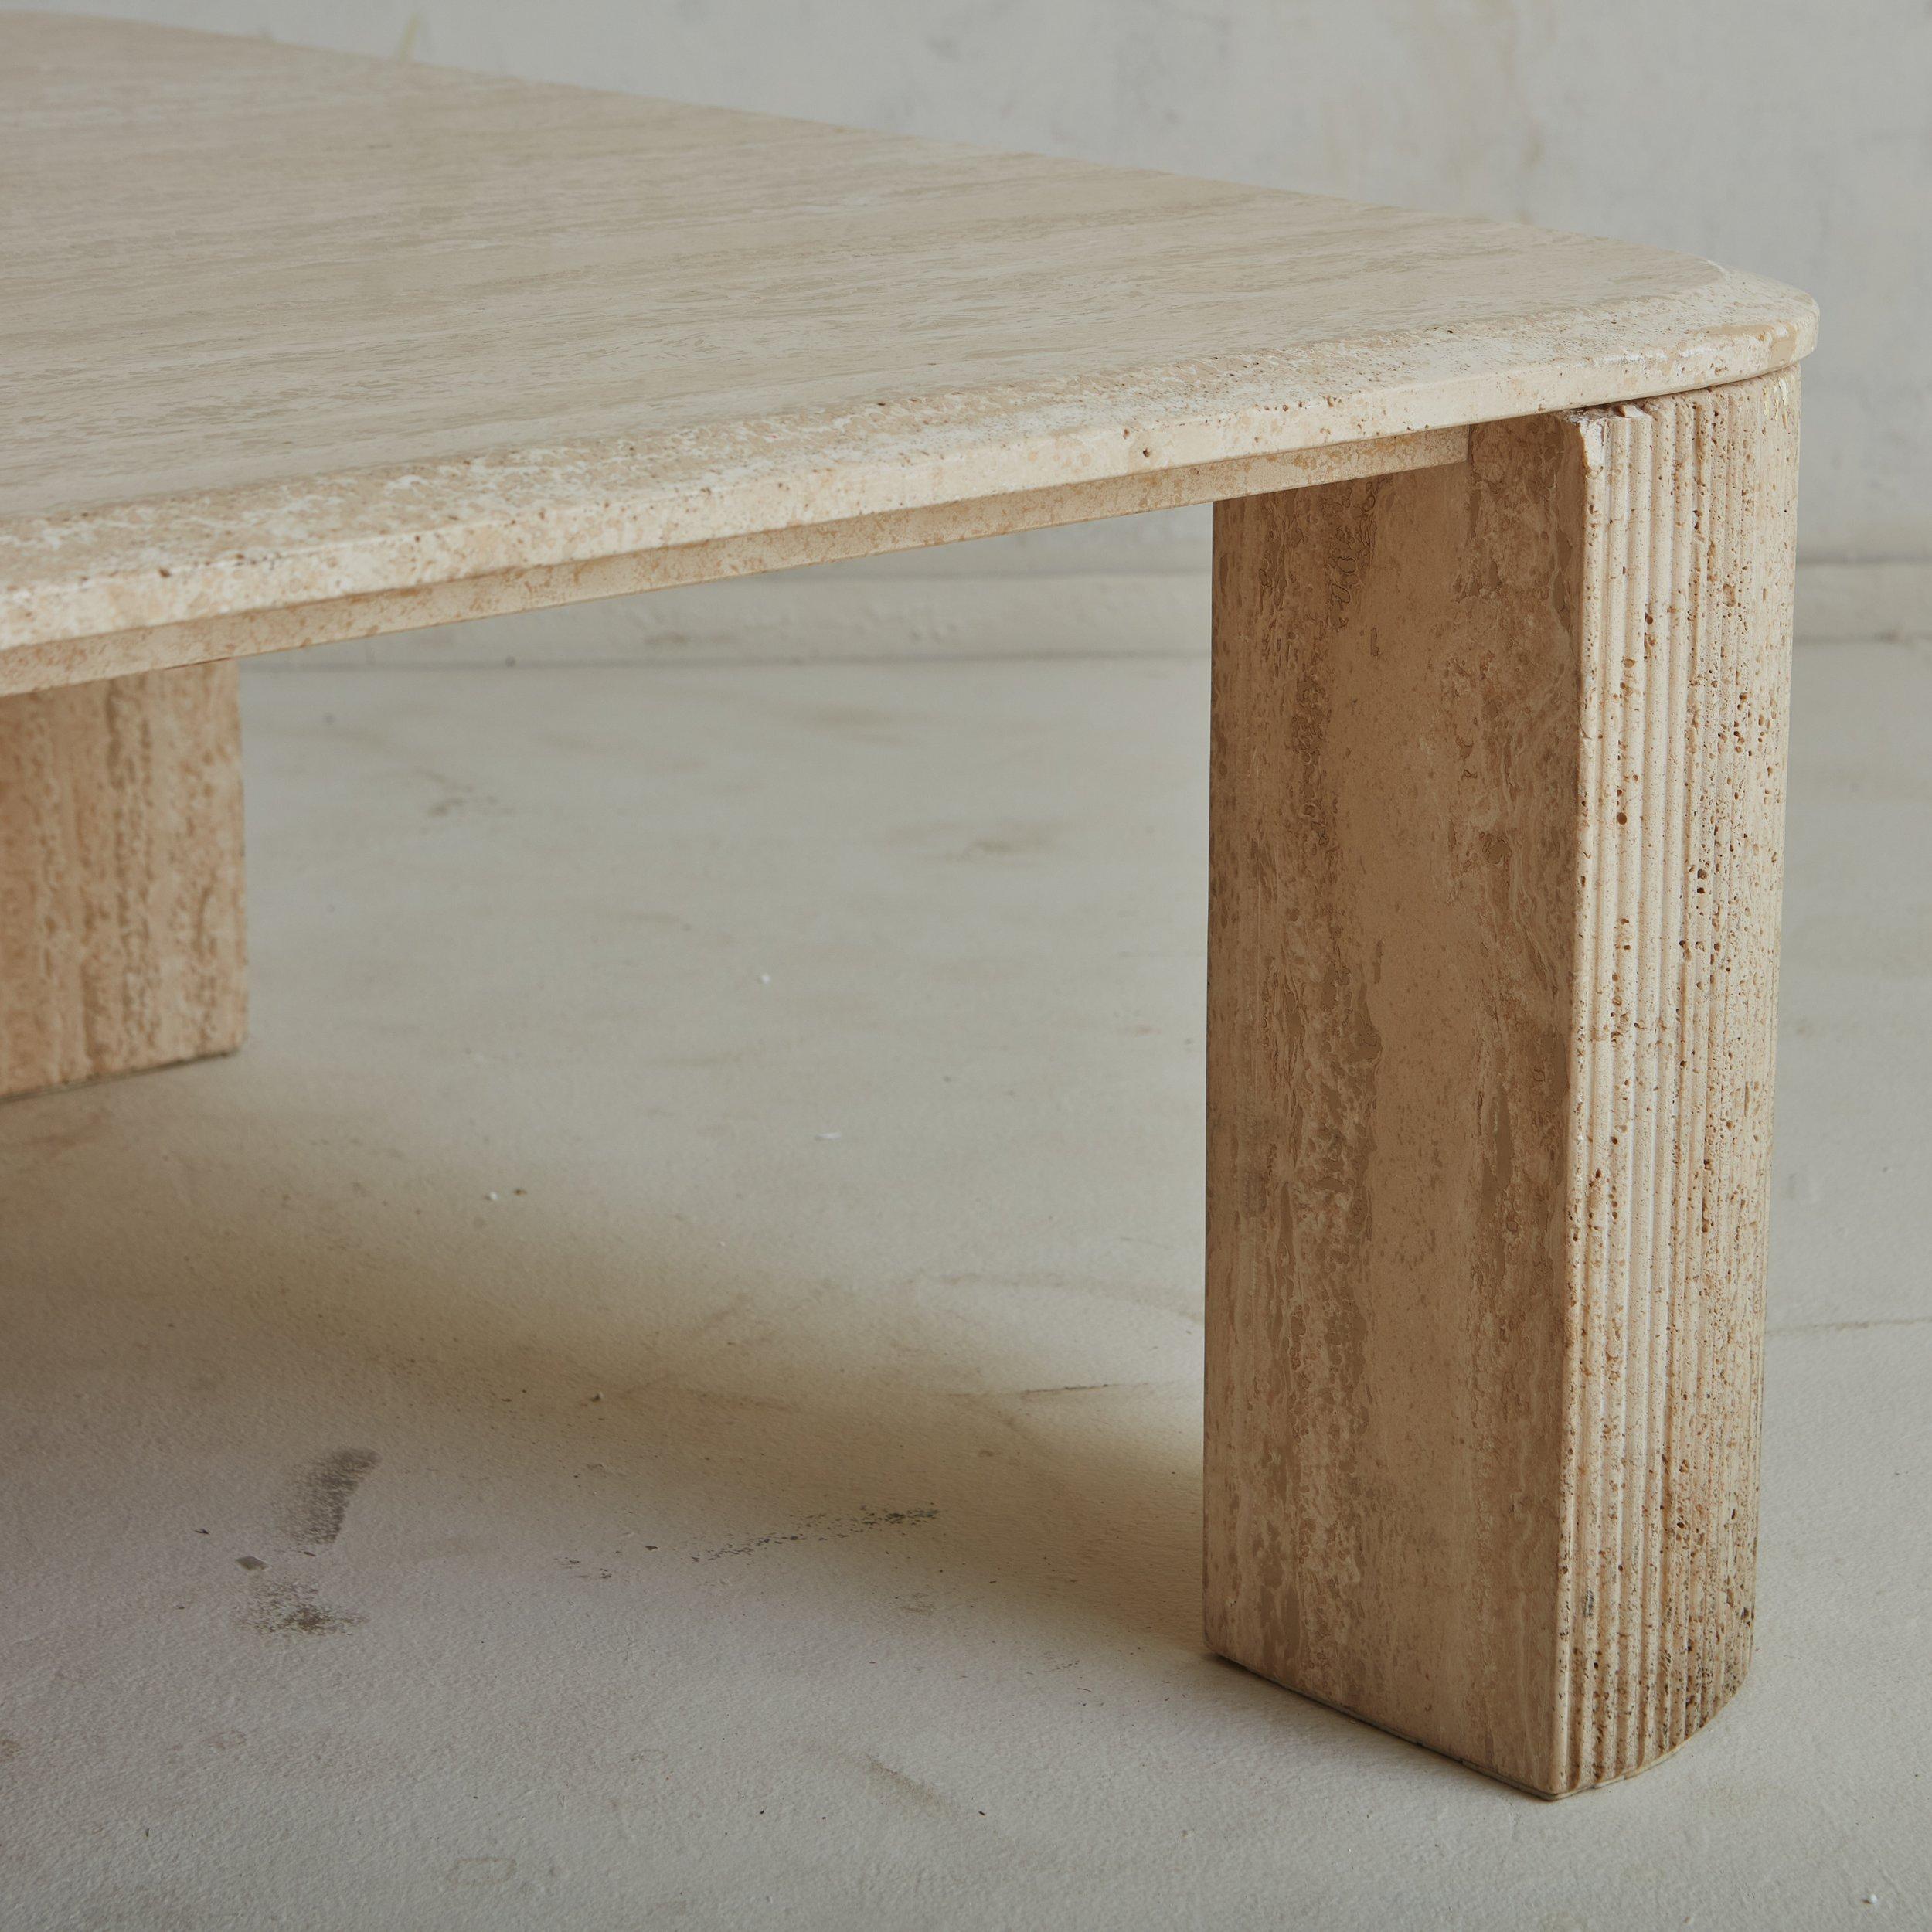 Italian Square Travertine Coffee Table with Fluted Legs, Italy 20th Century For Sale